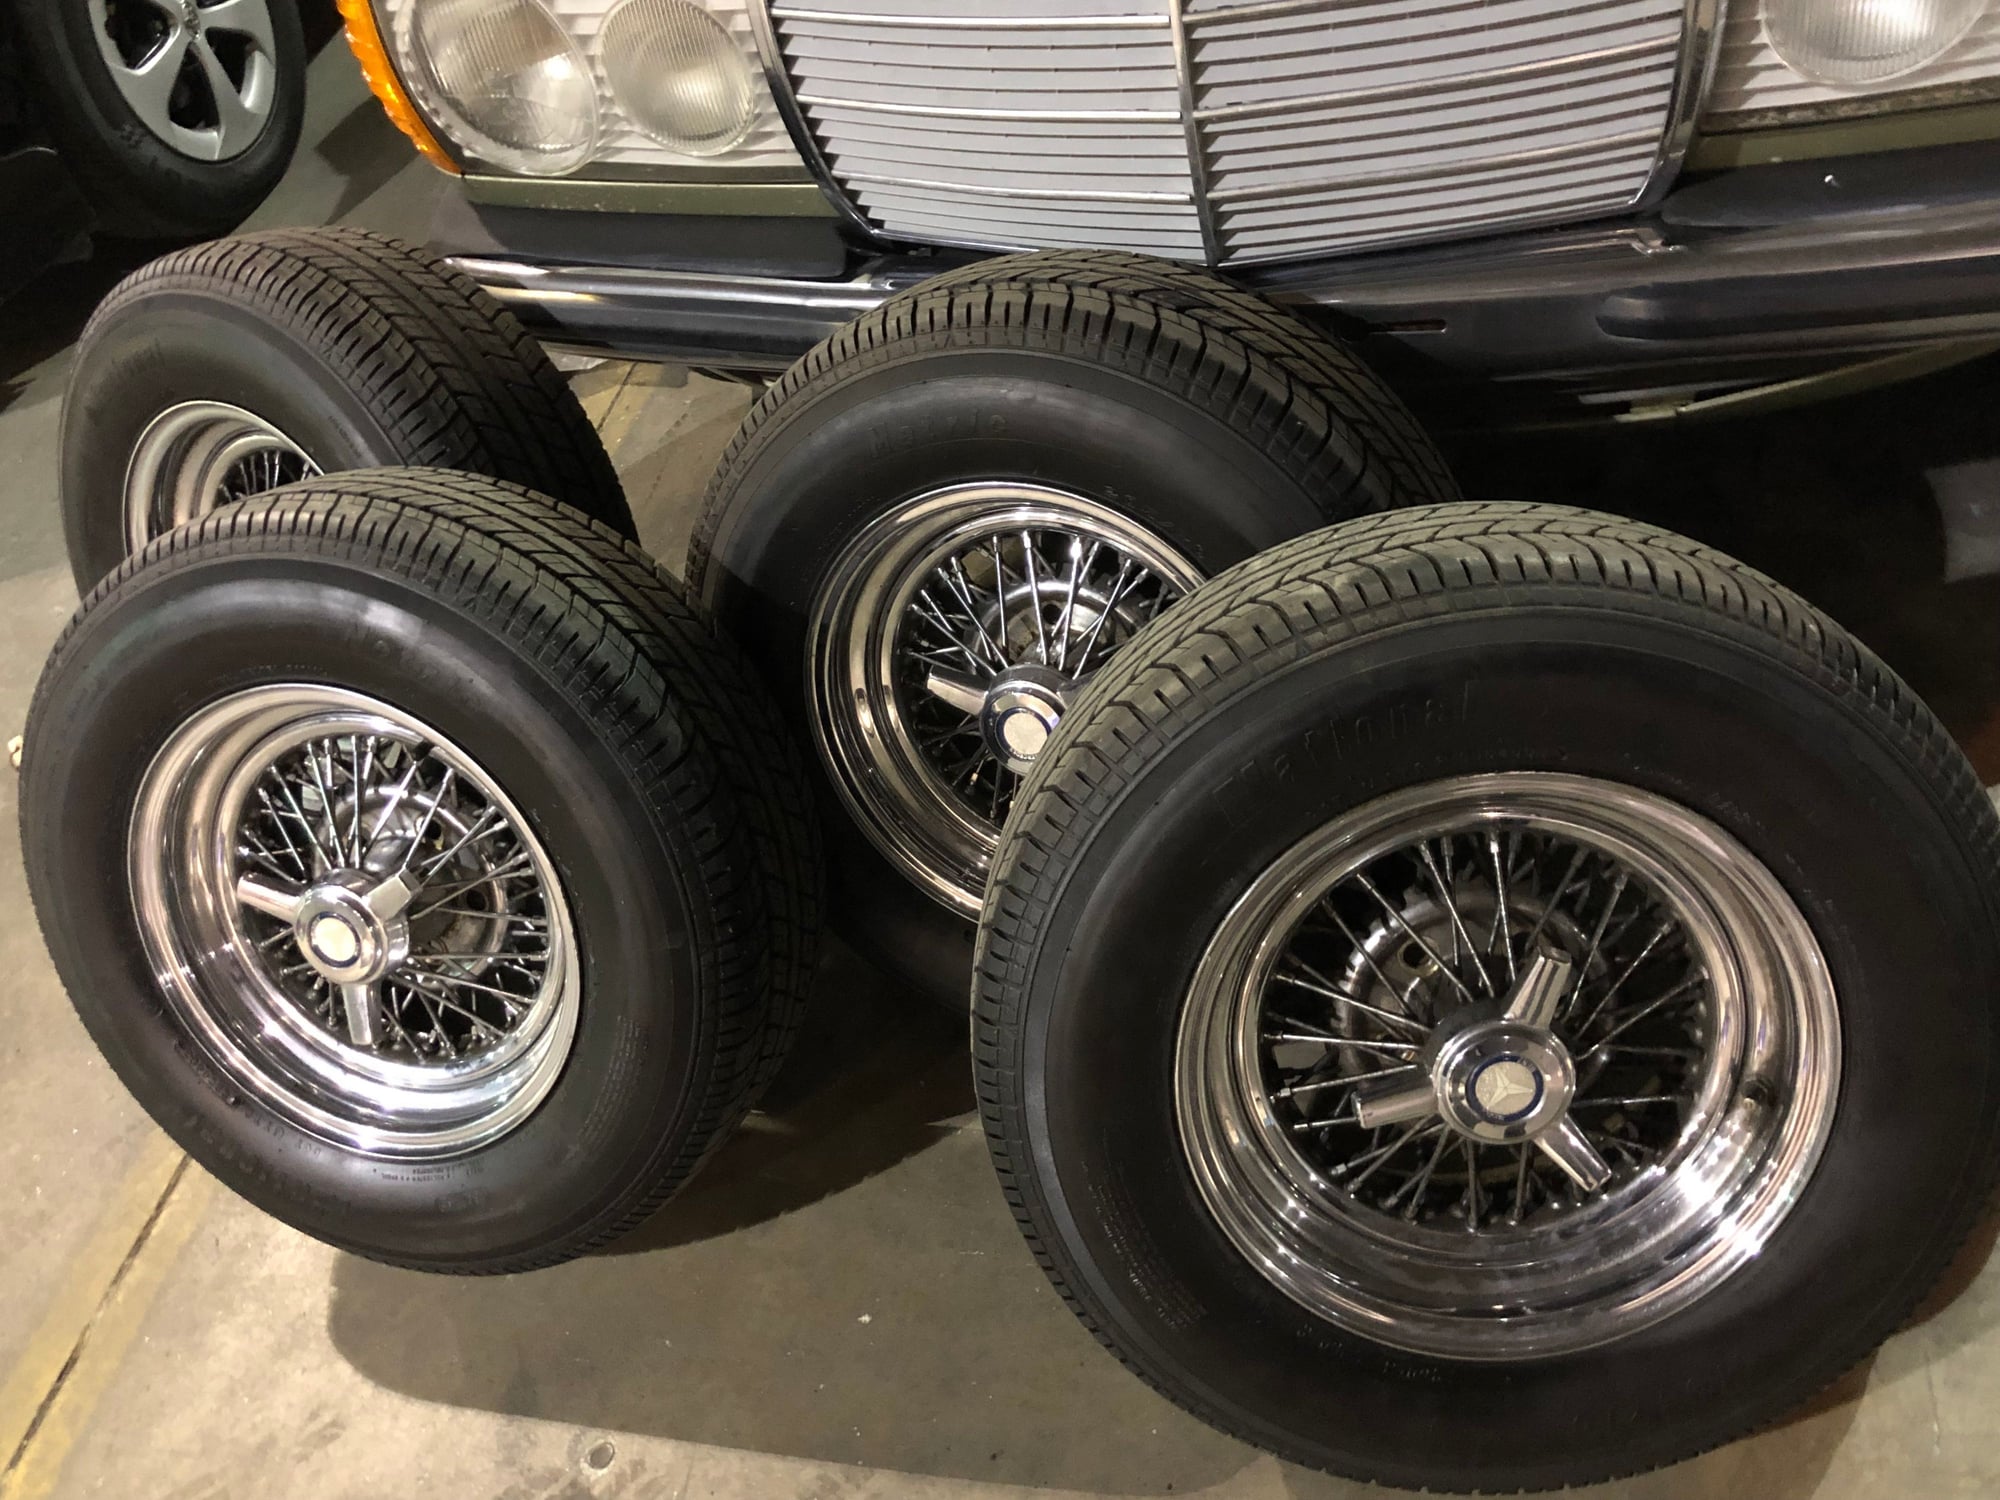 Wheels and Tires/Axles - Mercedes 560 SL 14x7 wire wheels - Used - Baltimore, MD 21218, United States